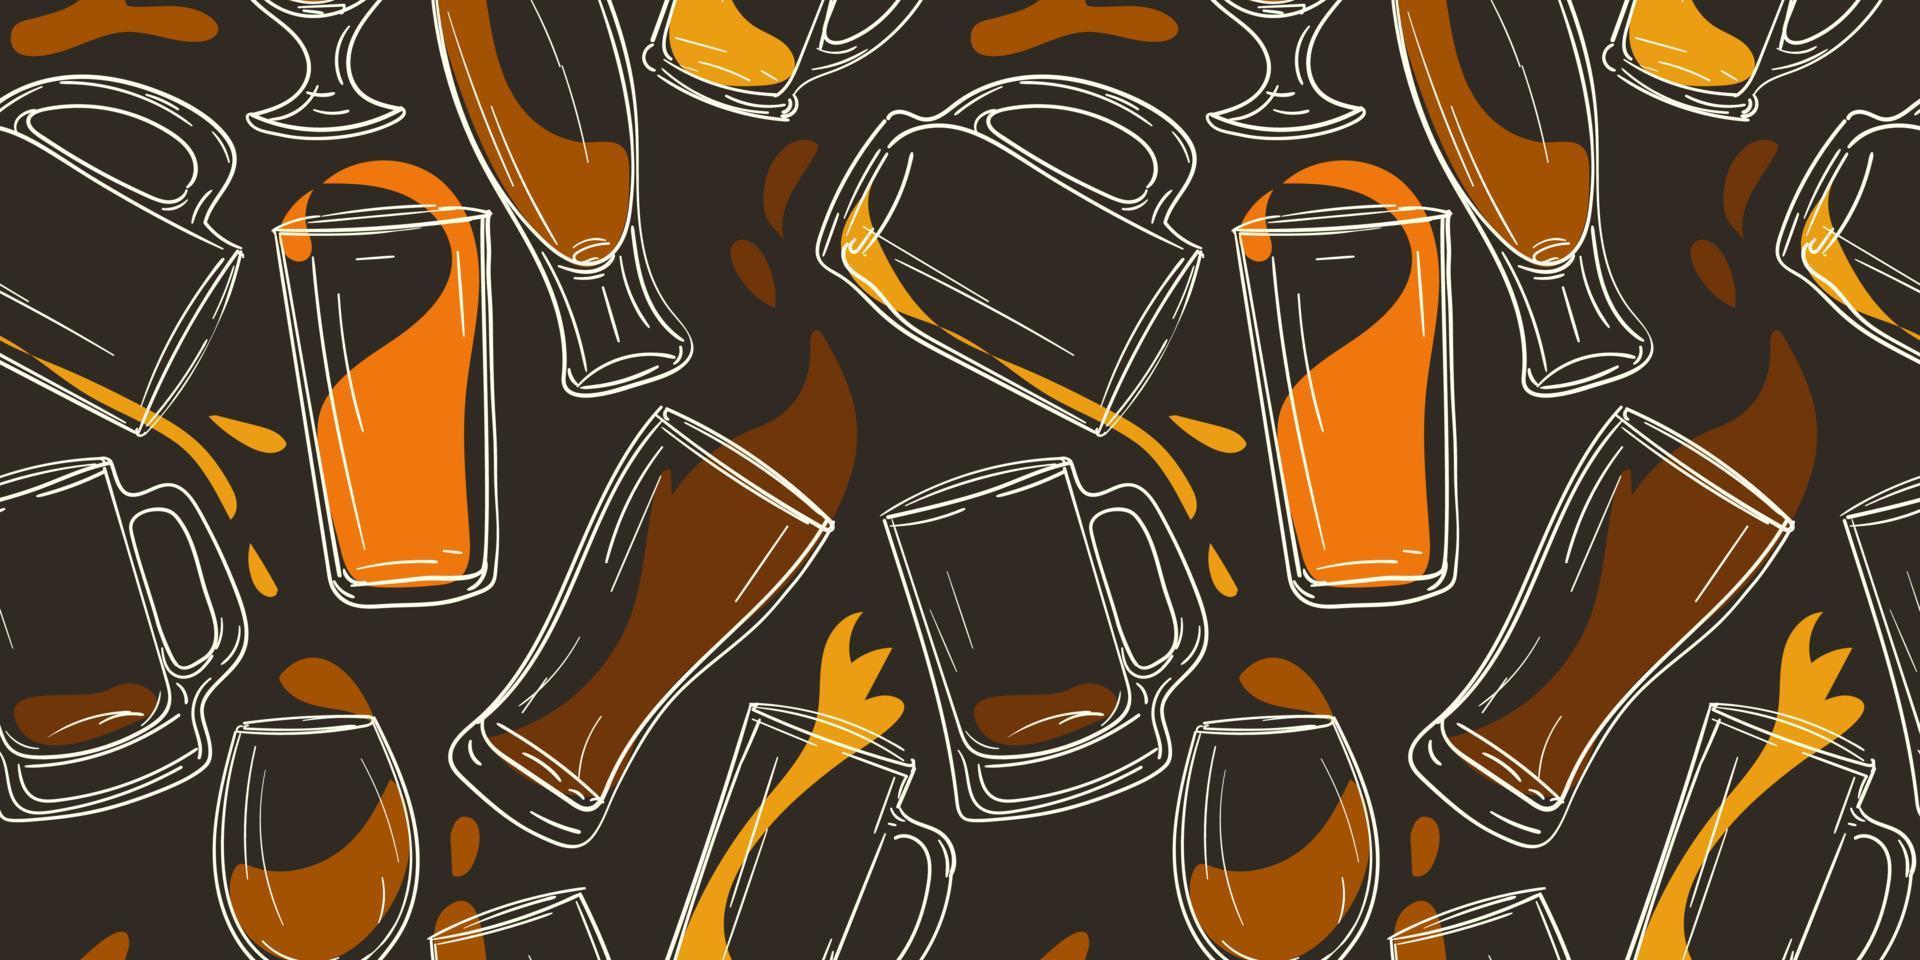 A pattern of beer glasses, mugs with beer varieties. Graphics on a dark background. Vintage vector illustration for poster printing, party invitations. Glass mugs with the effect of pouring beer